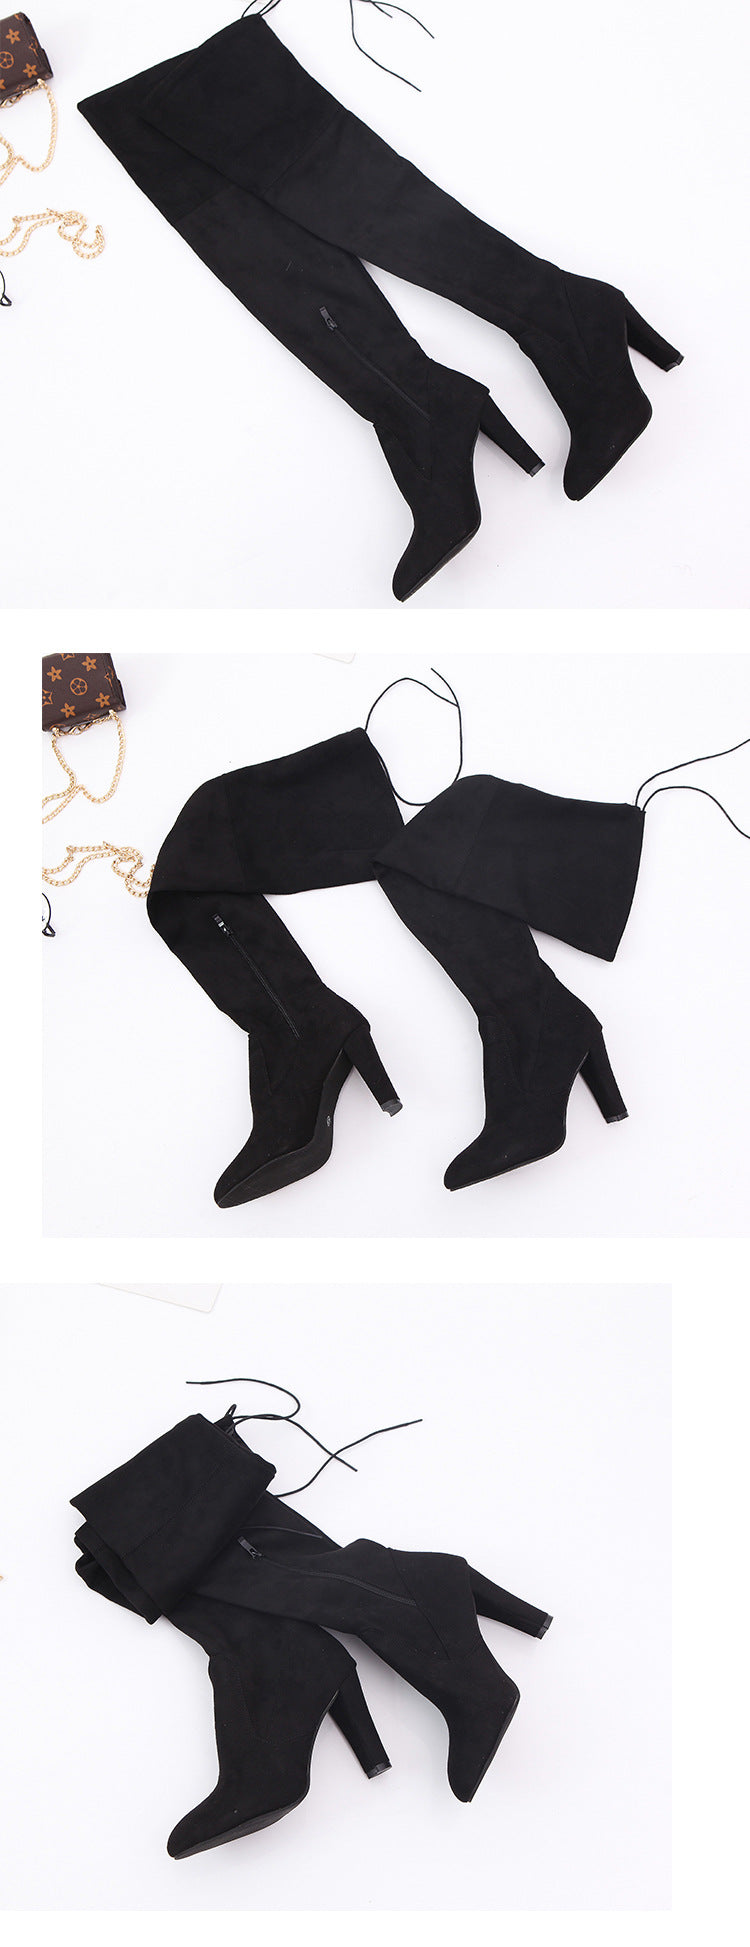 Heeled Over the Knee Boots